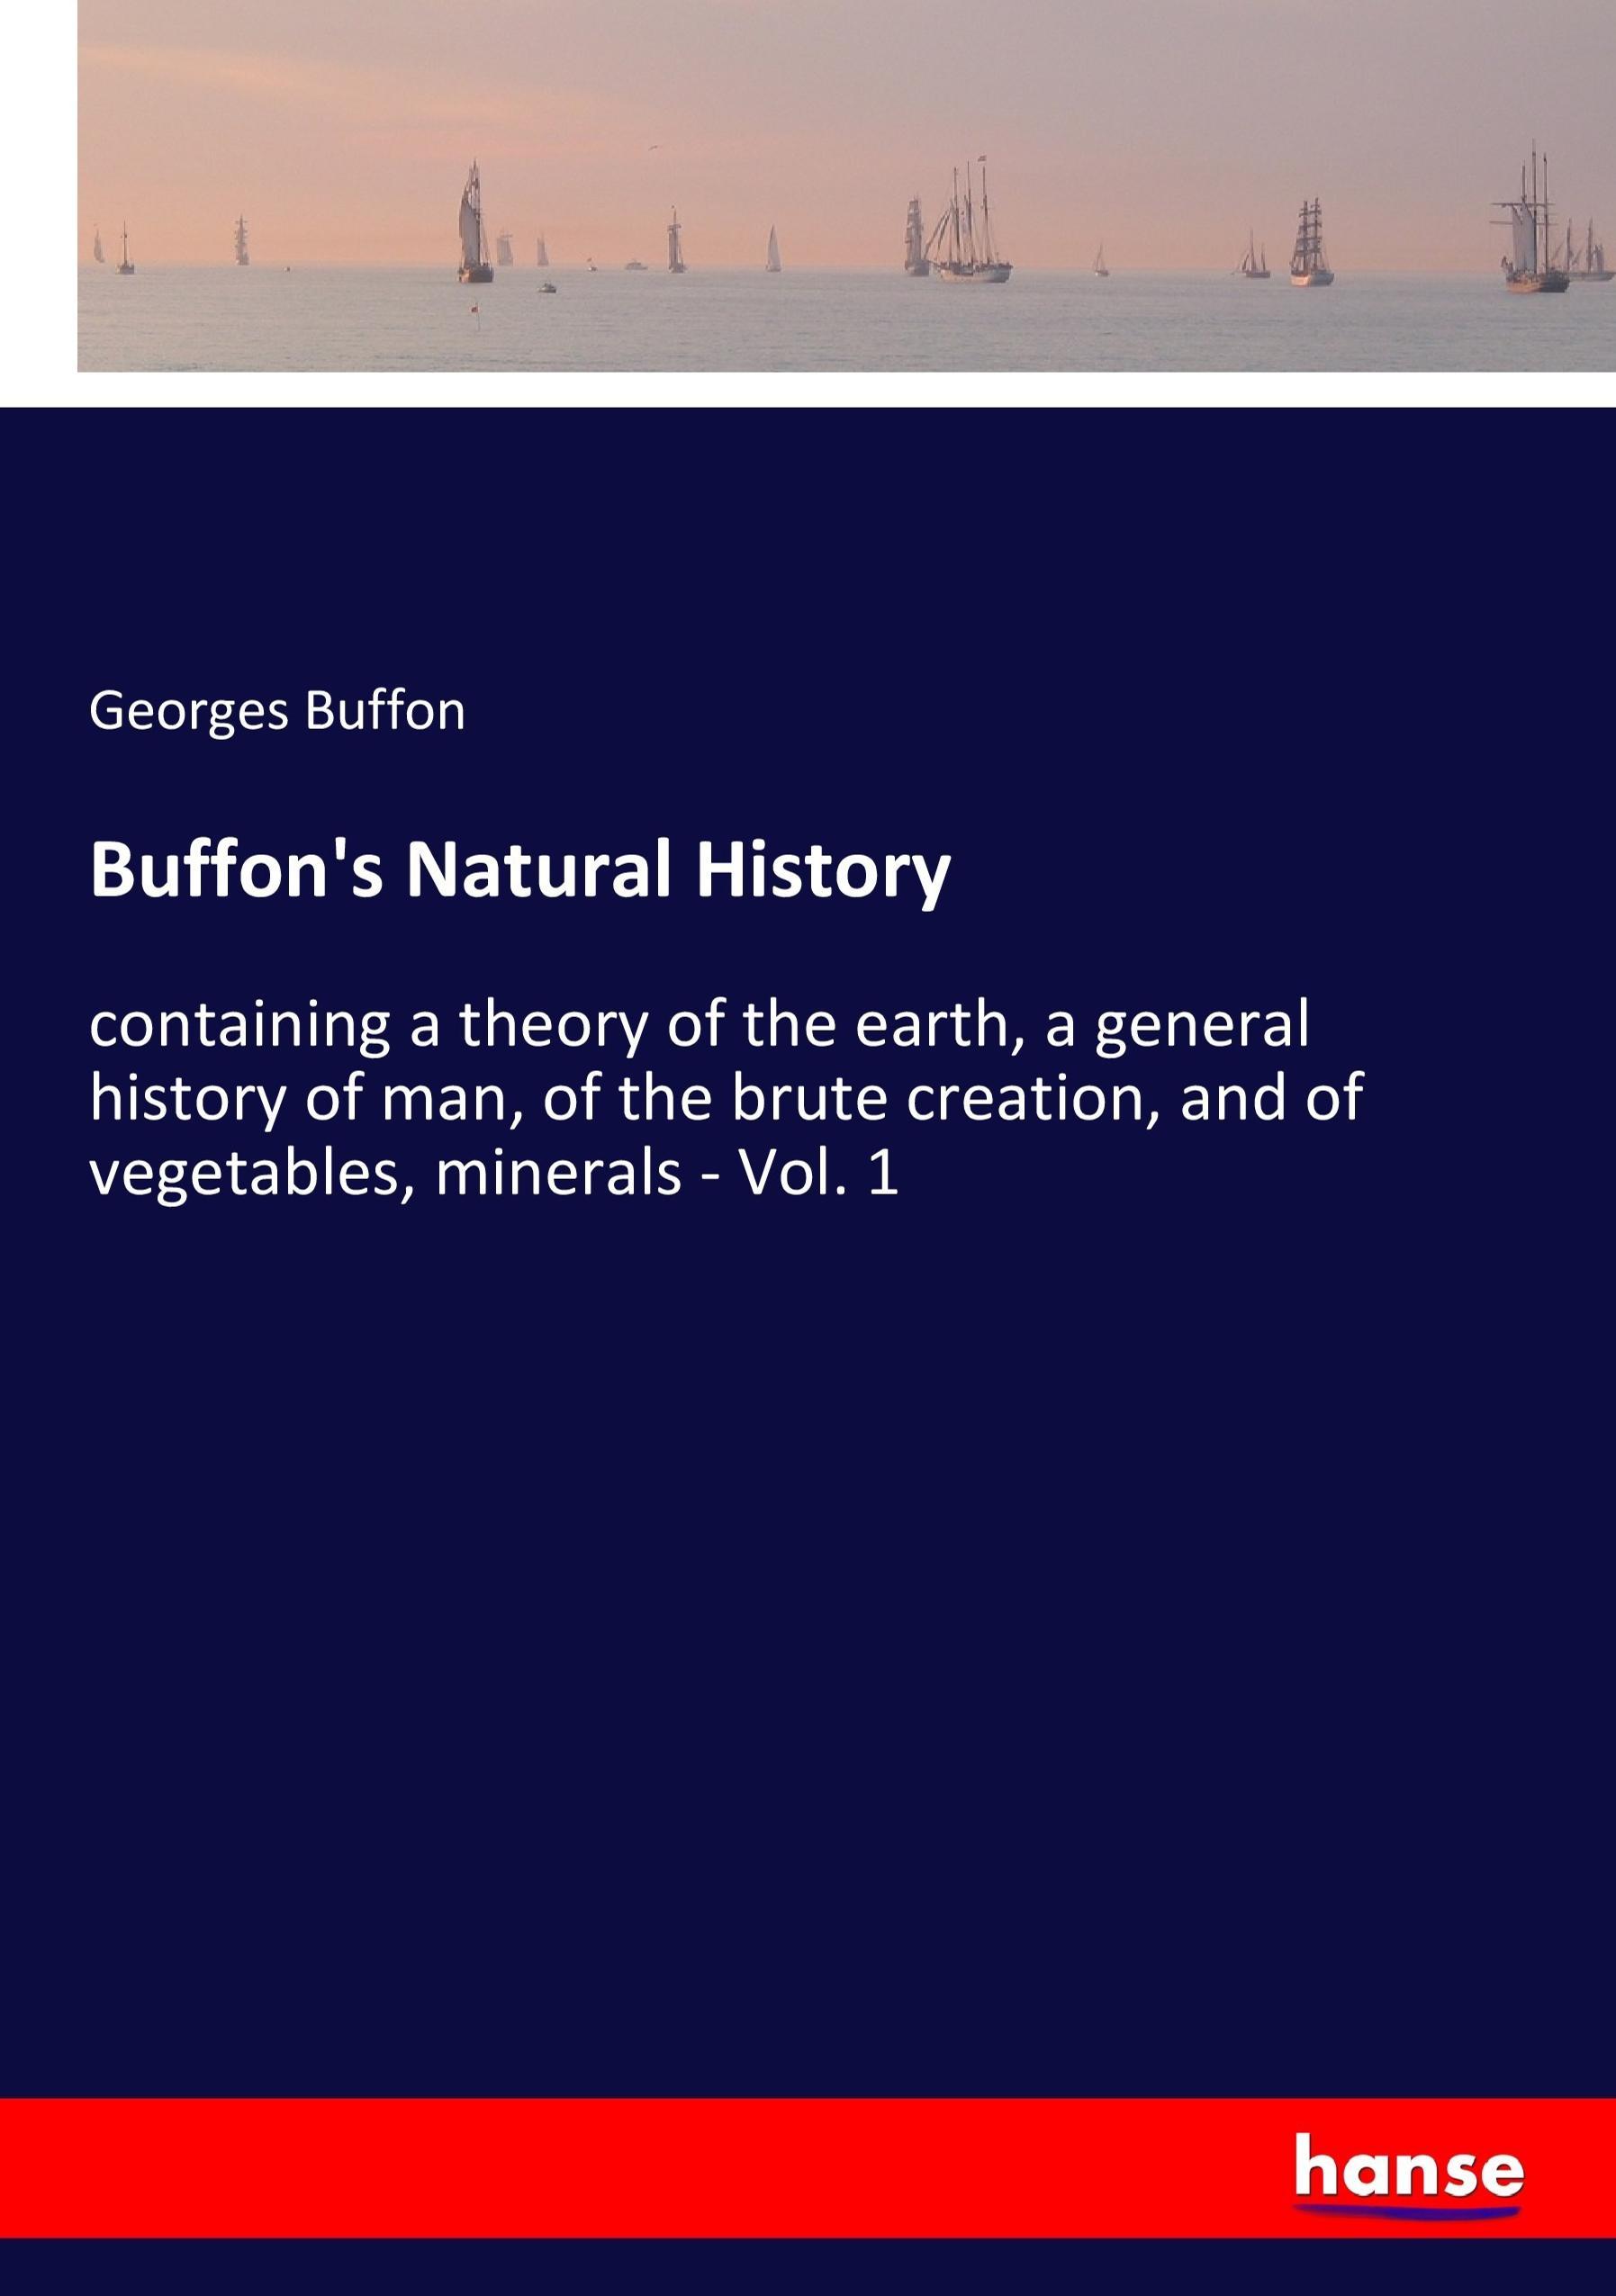 Buffon's Natural History | containing a theory of the earth, a general history of man, of the brute creation, and of vegetables, minerals - Vol. 1 | Georges Buffon | Taschenbuch | Paperback | 348 S. - Buffon, Georges